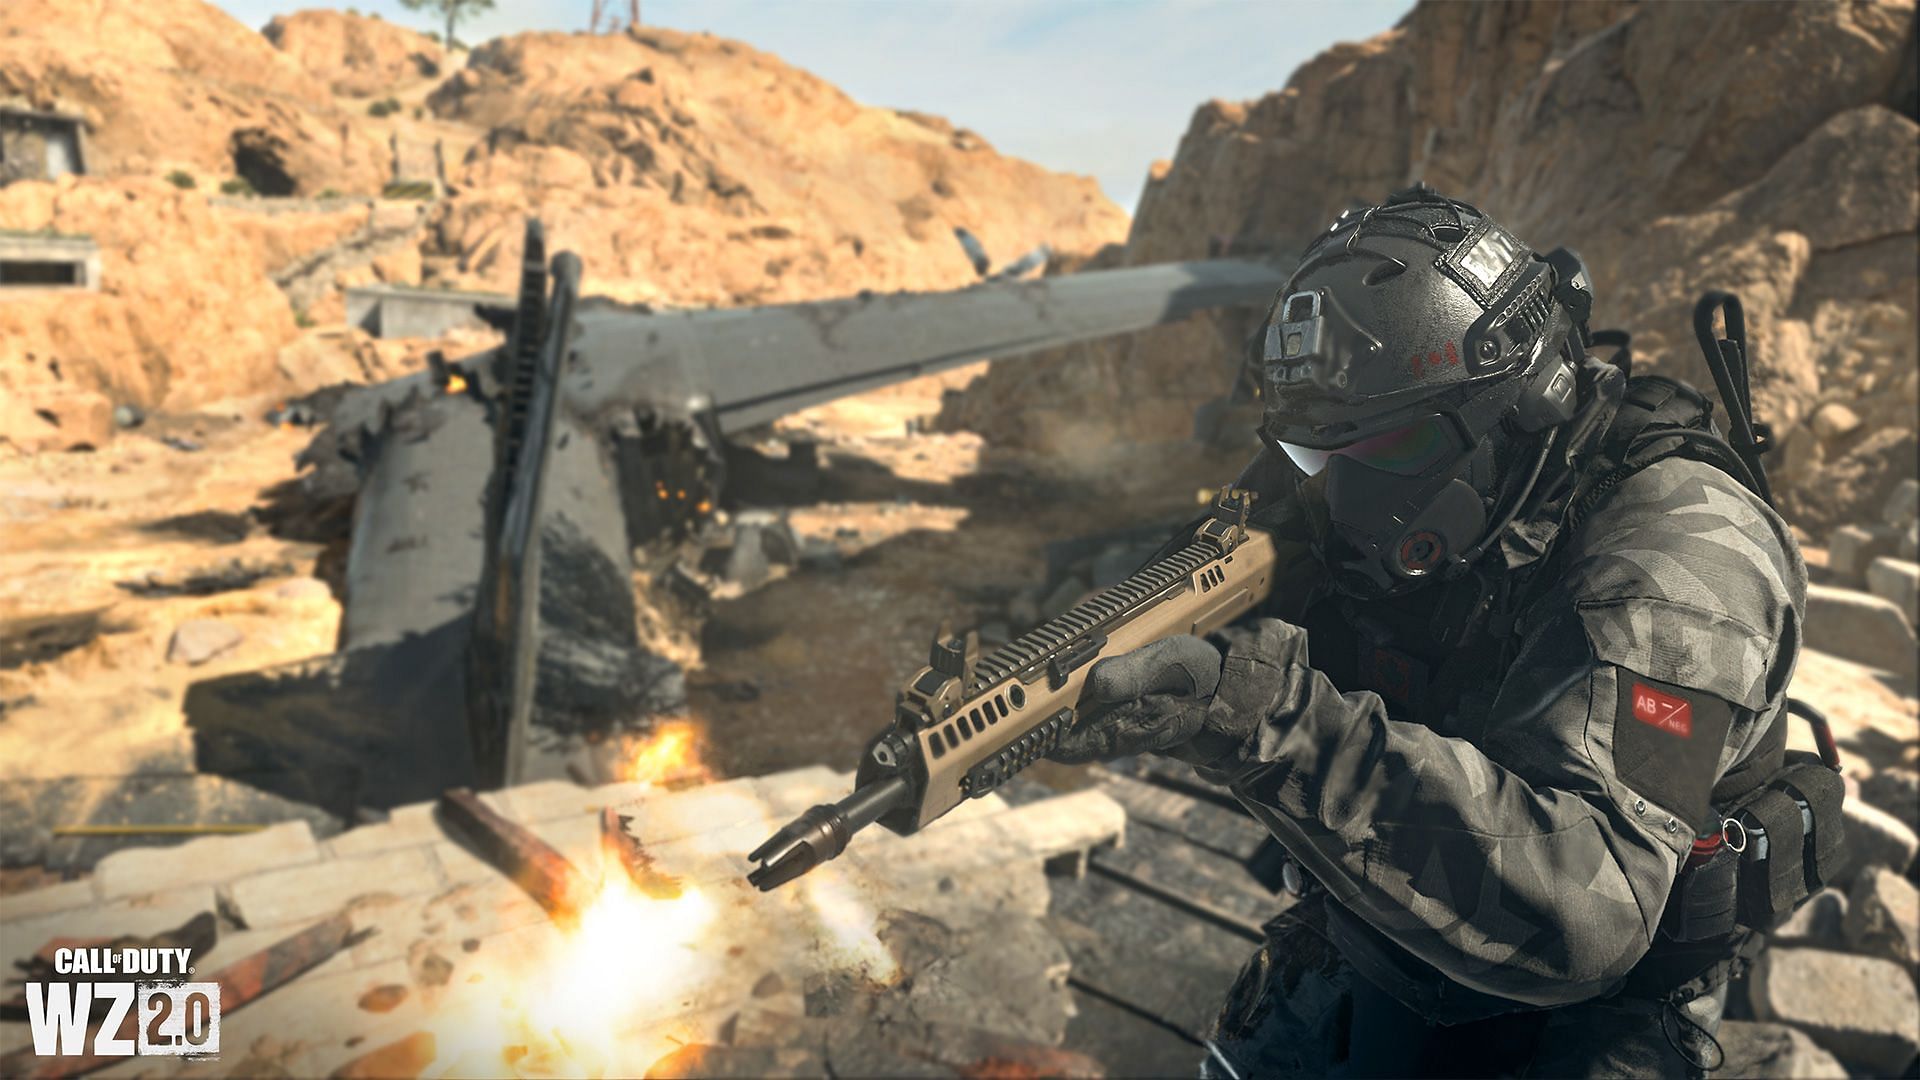 Warzone 2 will feel much different after the new season (Image via Activision)